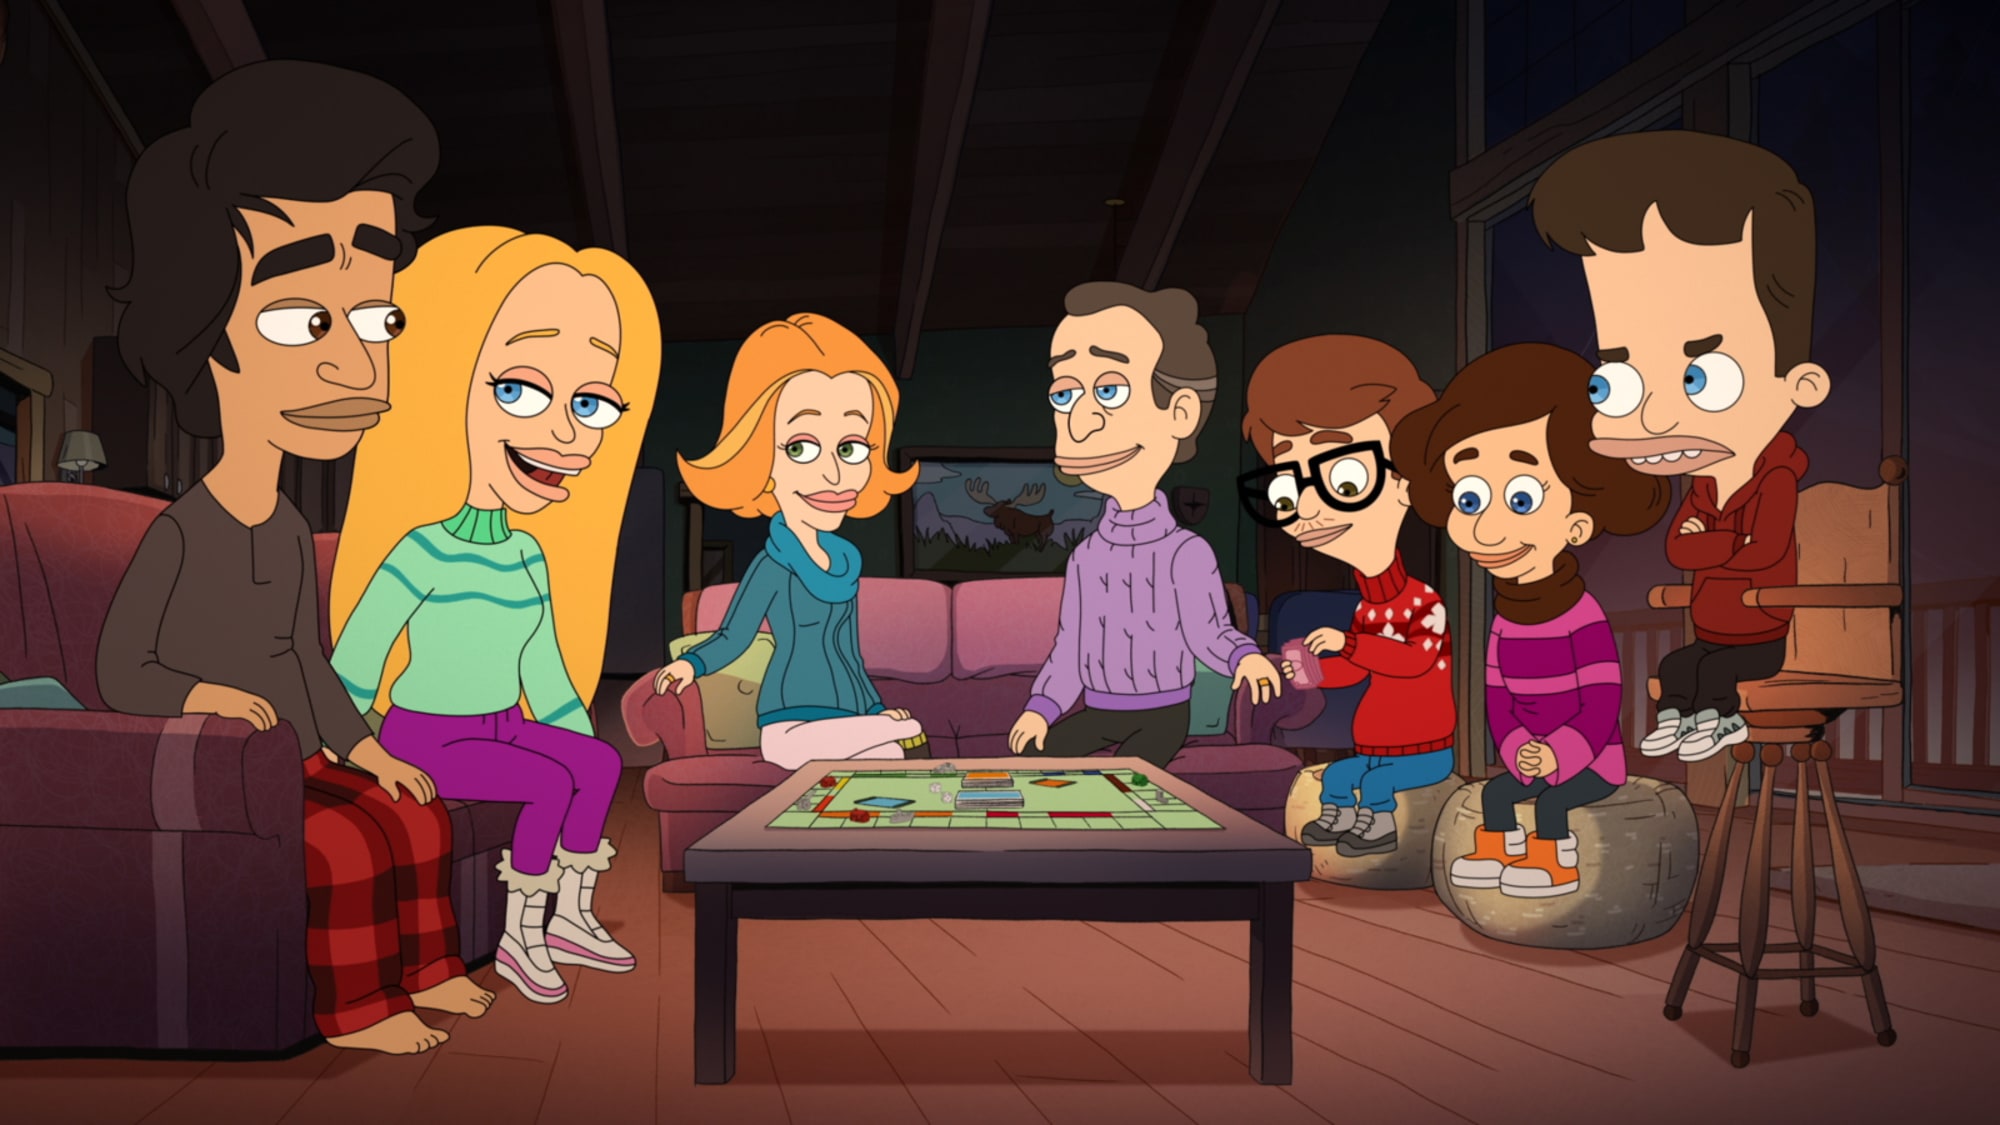 Characters of big mouth